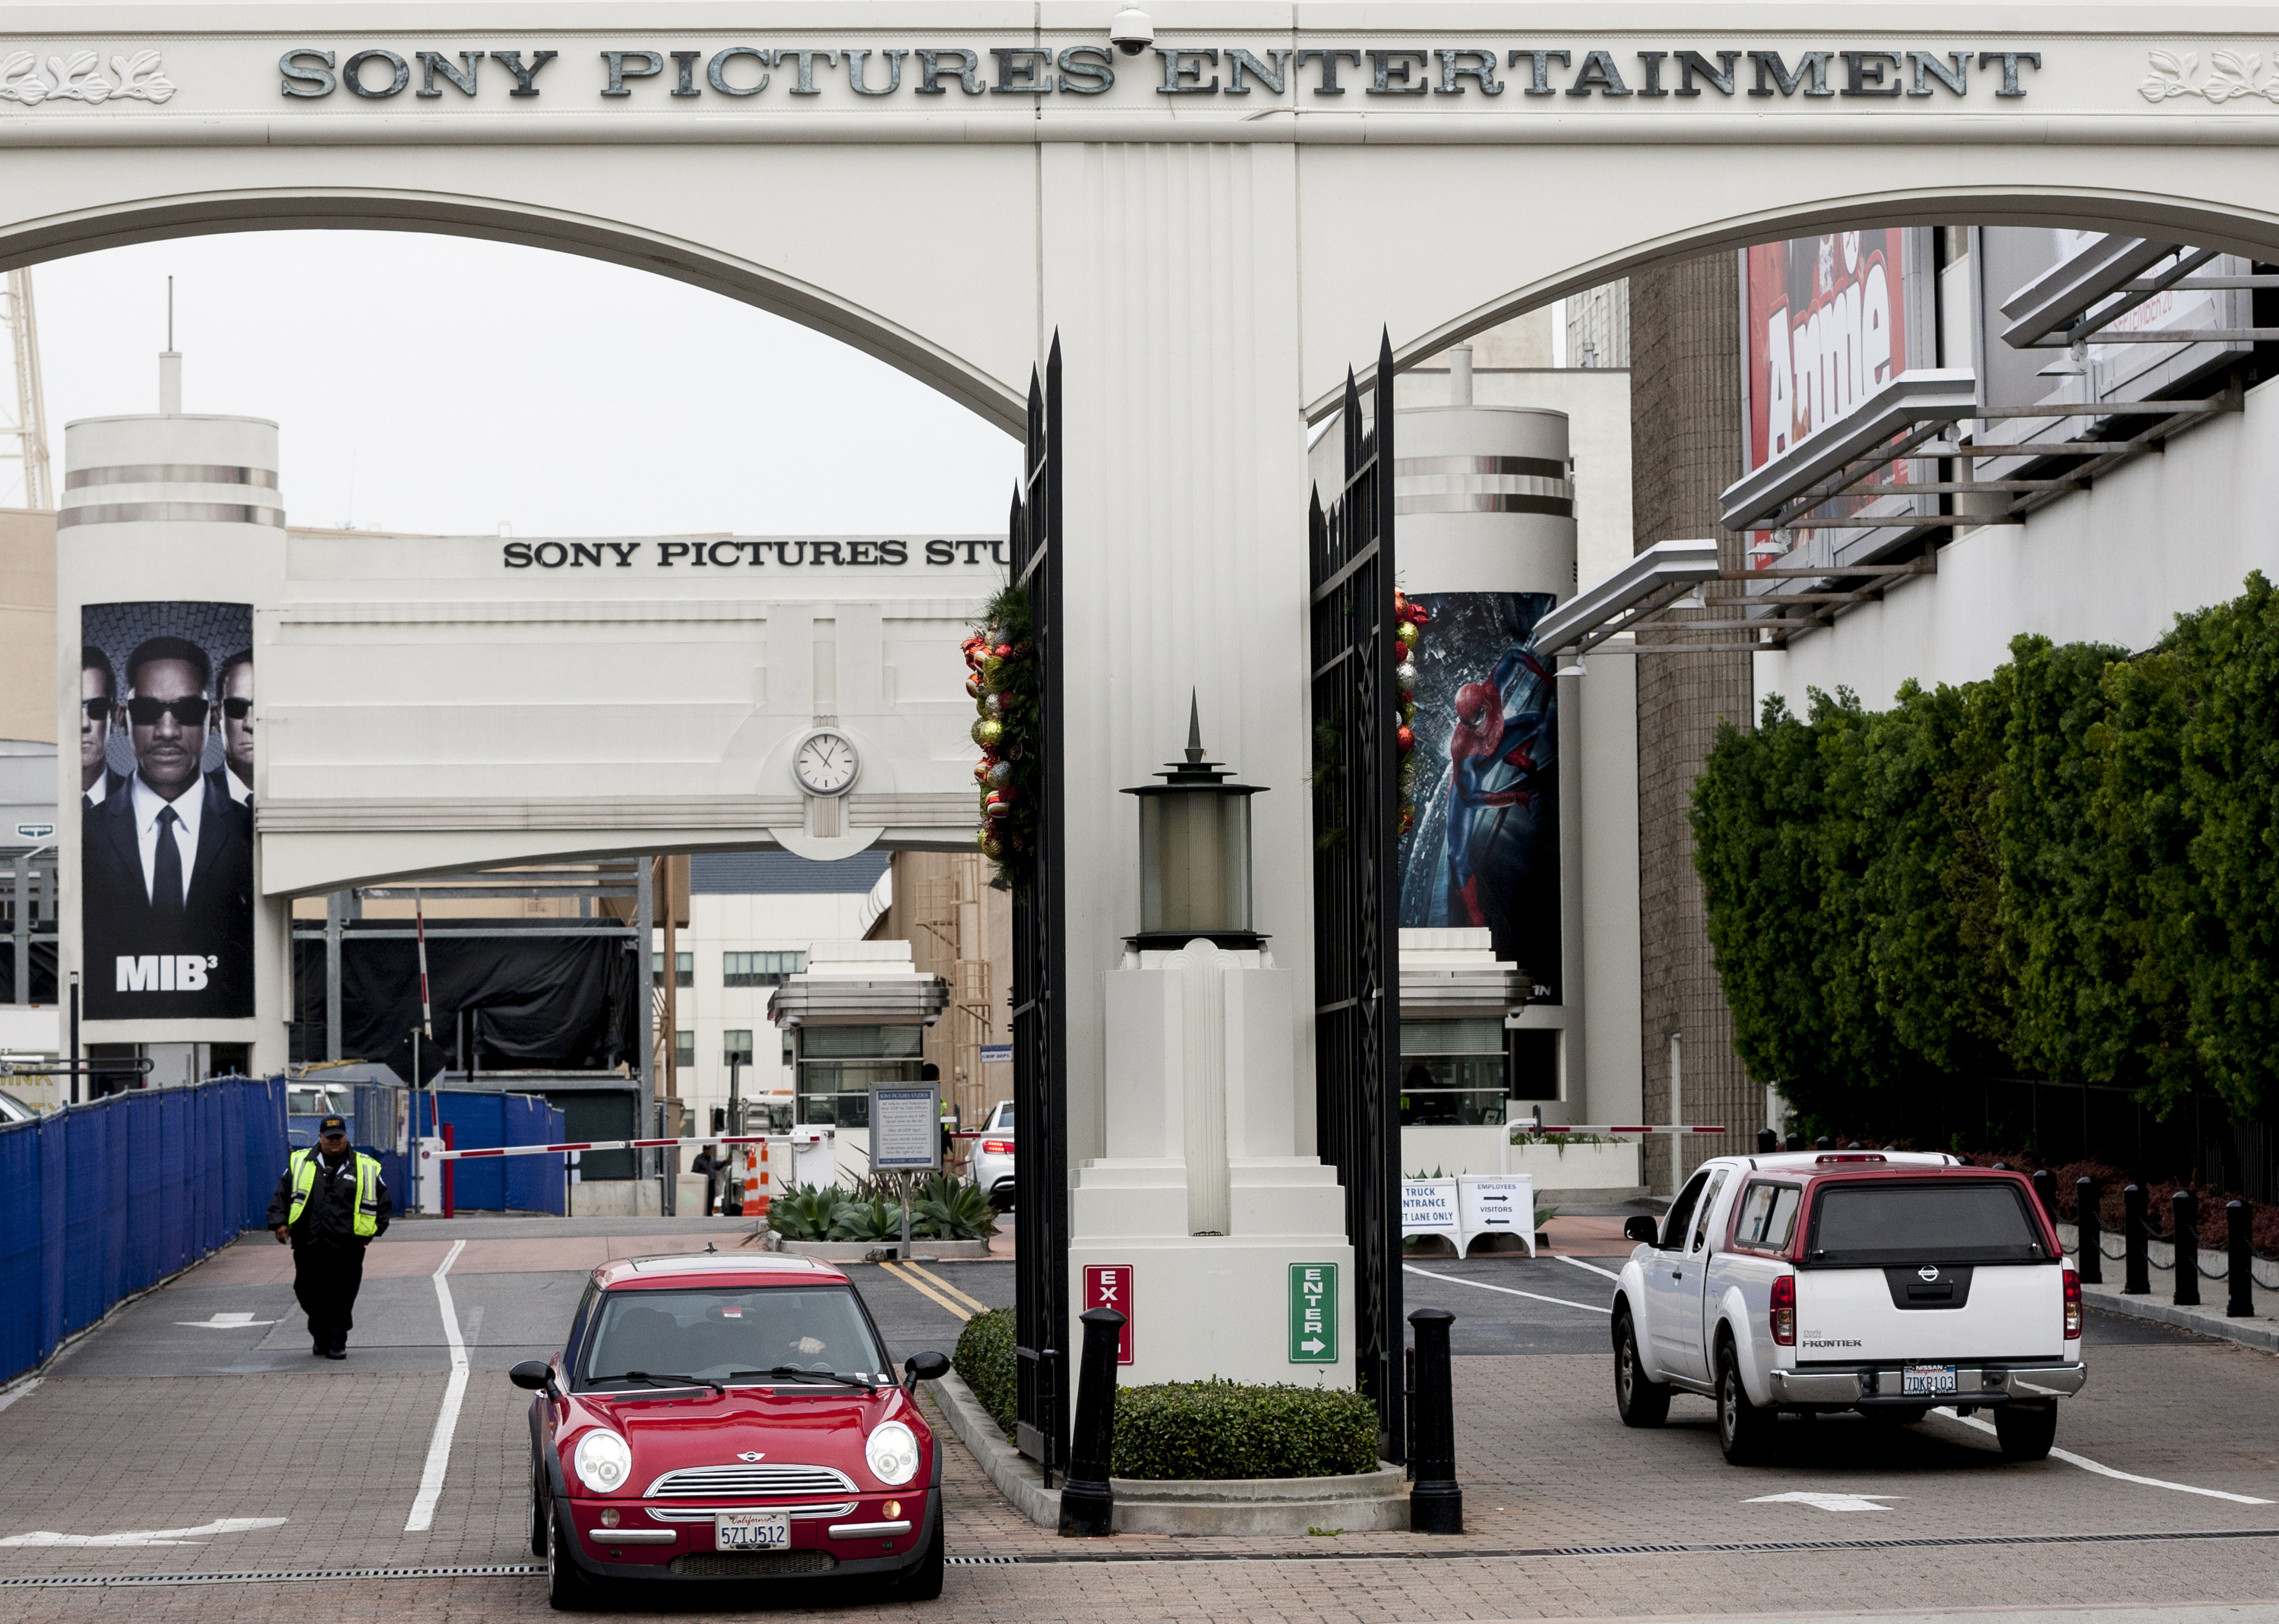 FILE - This Dec. 18, 2014 file photo shows the entrance of Sony Pictures Entertainment studio lot in Culver City, Calif. Sony Pictures Entertainment has reached a settlement with current and former employees, agreeing to pay up to $8 million to reimburse them for losses, preventative measures and legal fees related to the hack of its computers last year. The settlement was filed with the U.S. District Court in Los Angeles late Monday, Oct. 19, 2015. (AP Photo/Damian Dovarganes, File)